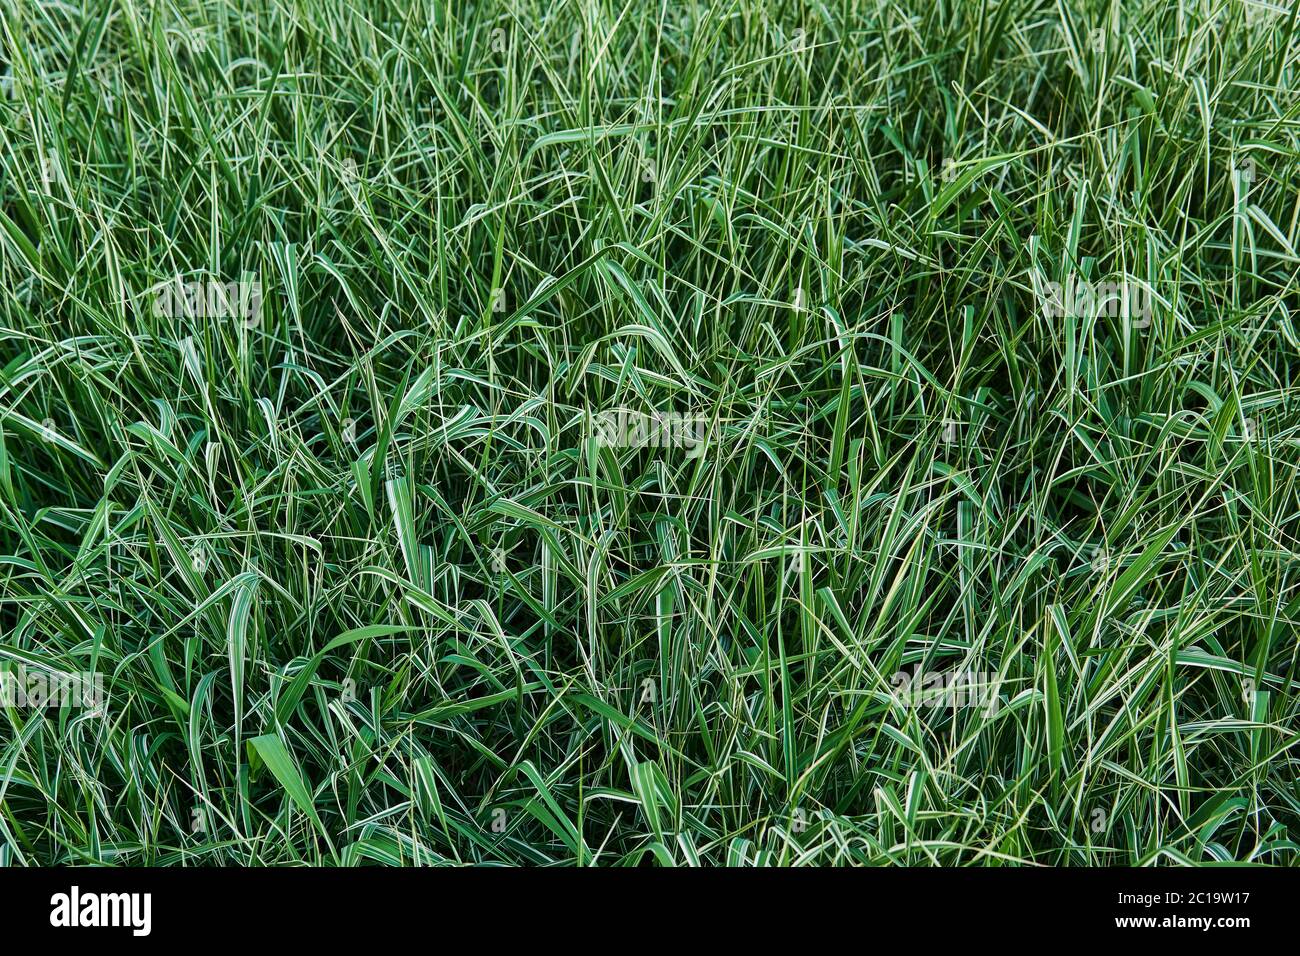 natural background - lawn of variegated phalaris ribbon grass with white stripes on leaves Stock Photo